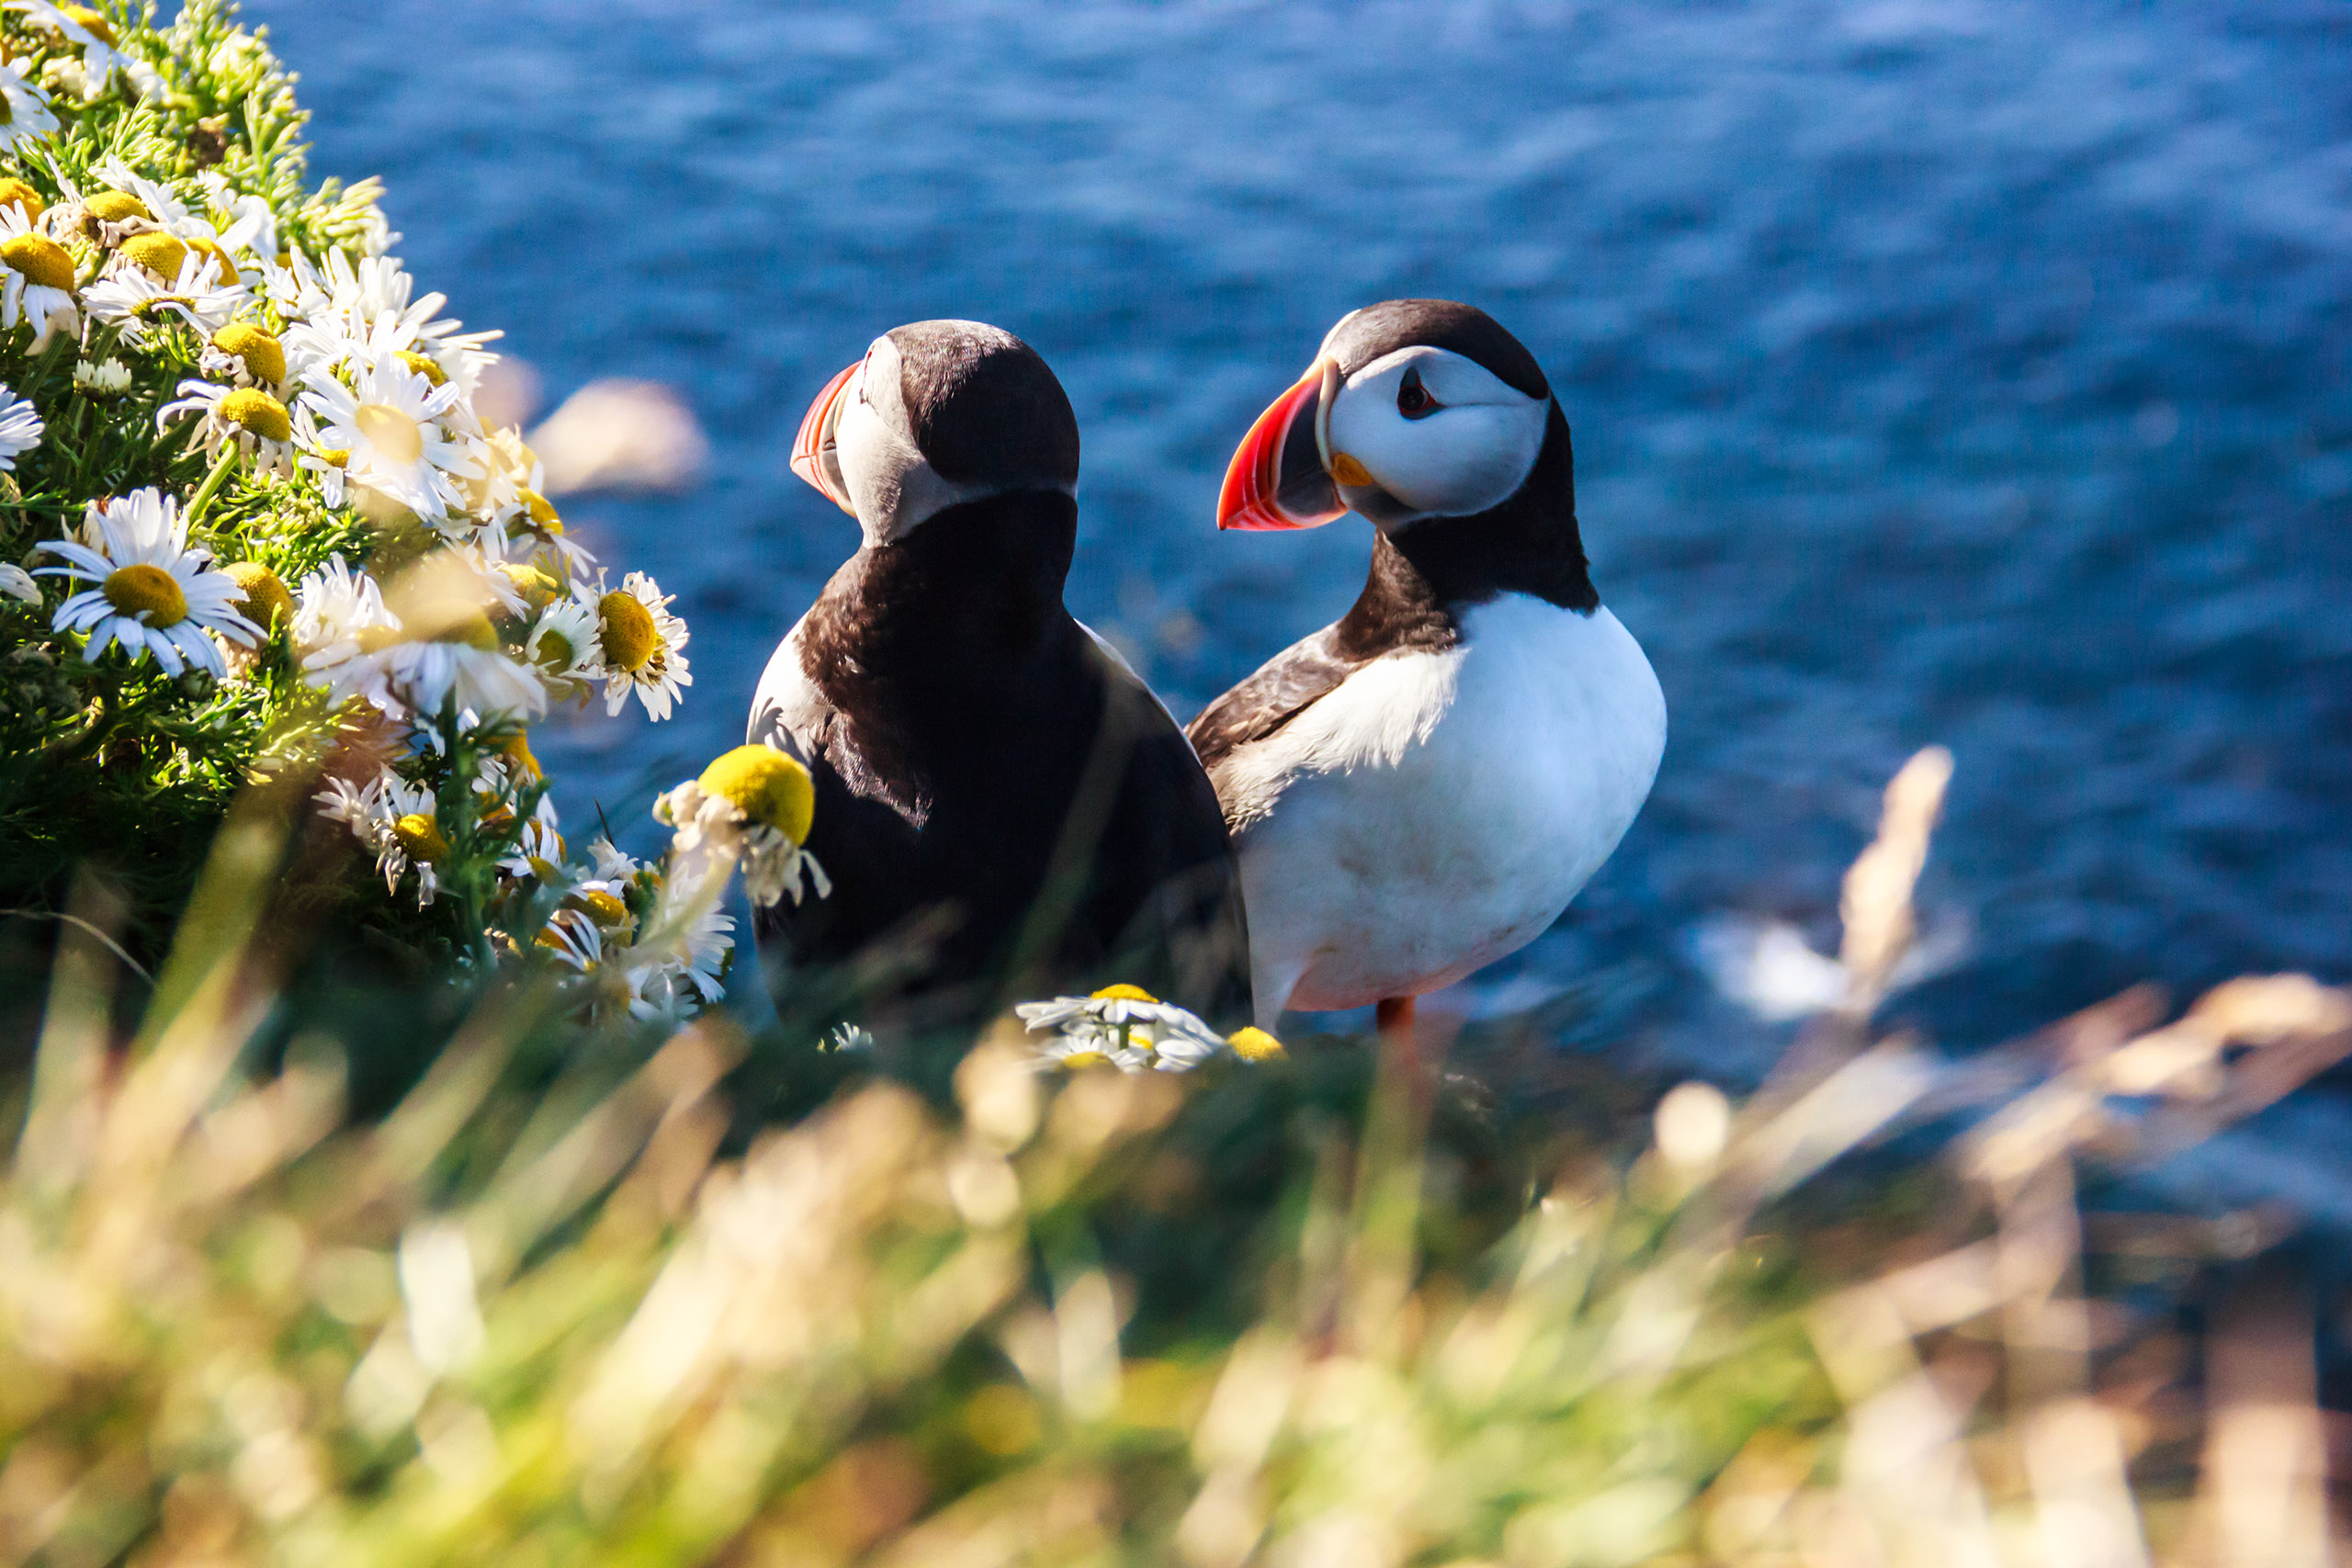 Icelandic Puffin bird couple standing in flower bushes on rocky cliff on sunny day at Latrabjarg, Iceland, Europe. Animal wildlife puffin in the wild has black crown and back, pale grey cheek patches